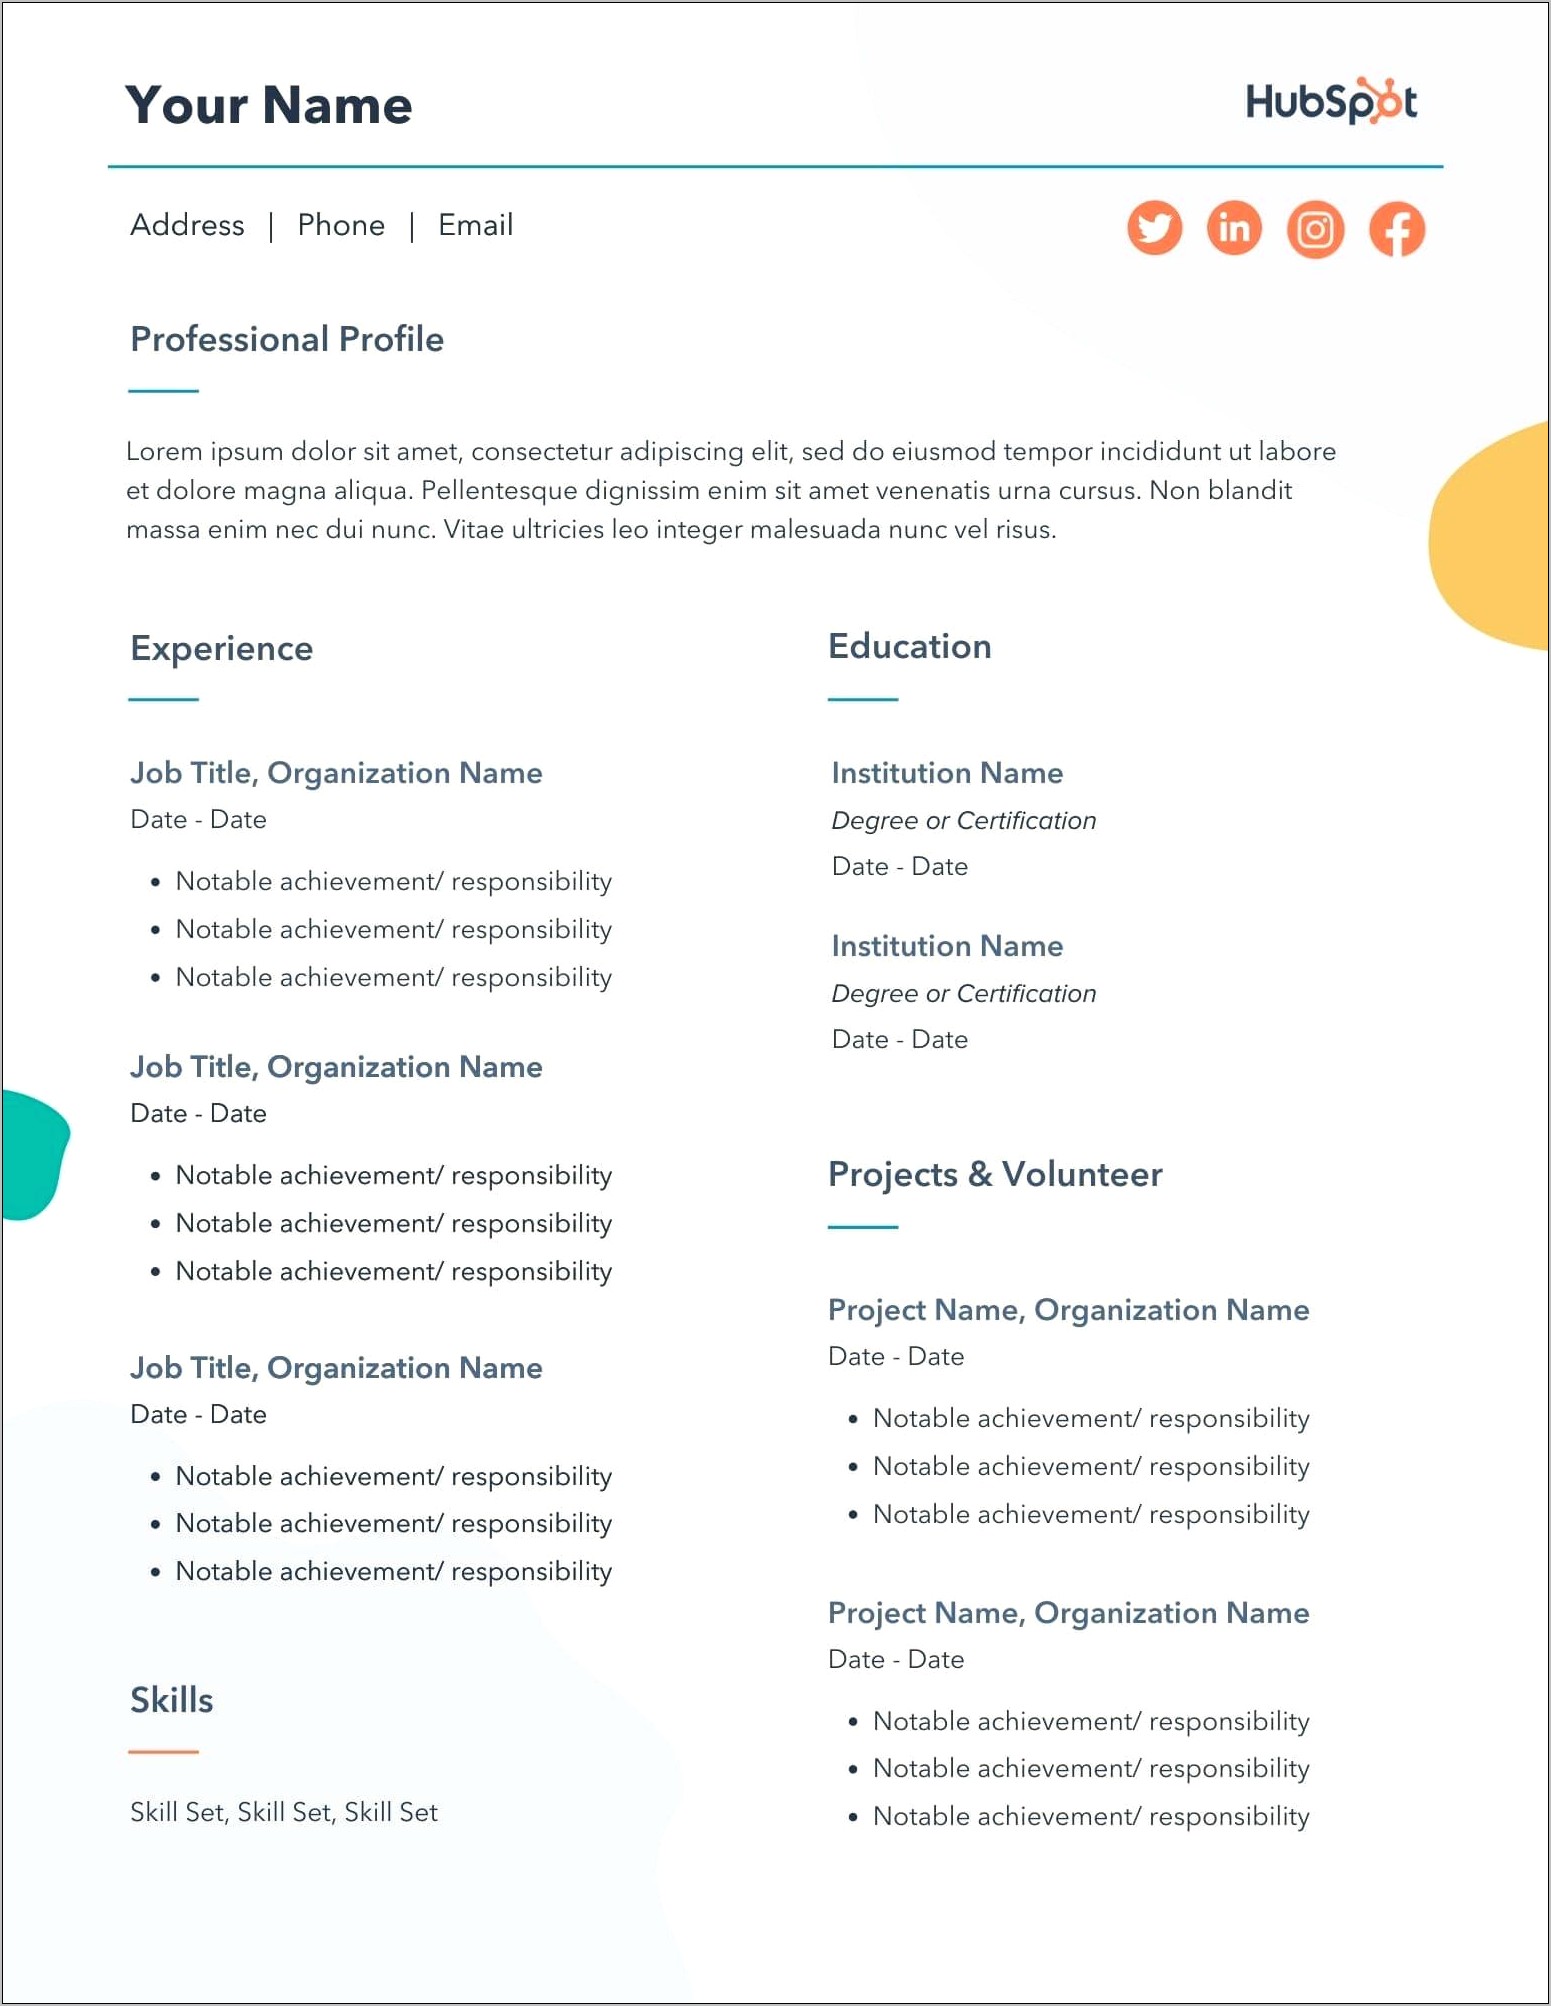 Resume Title Example For Experienced